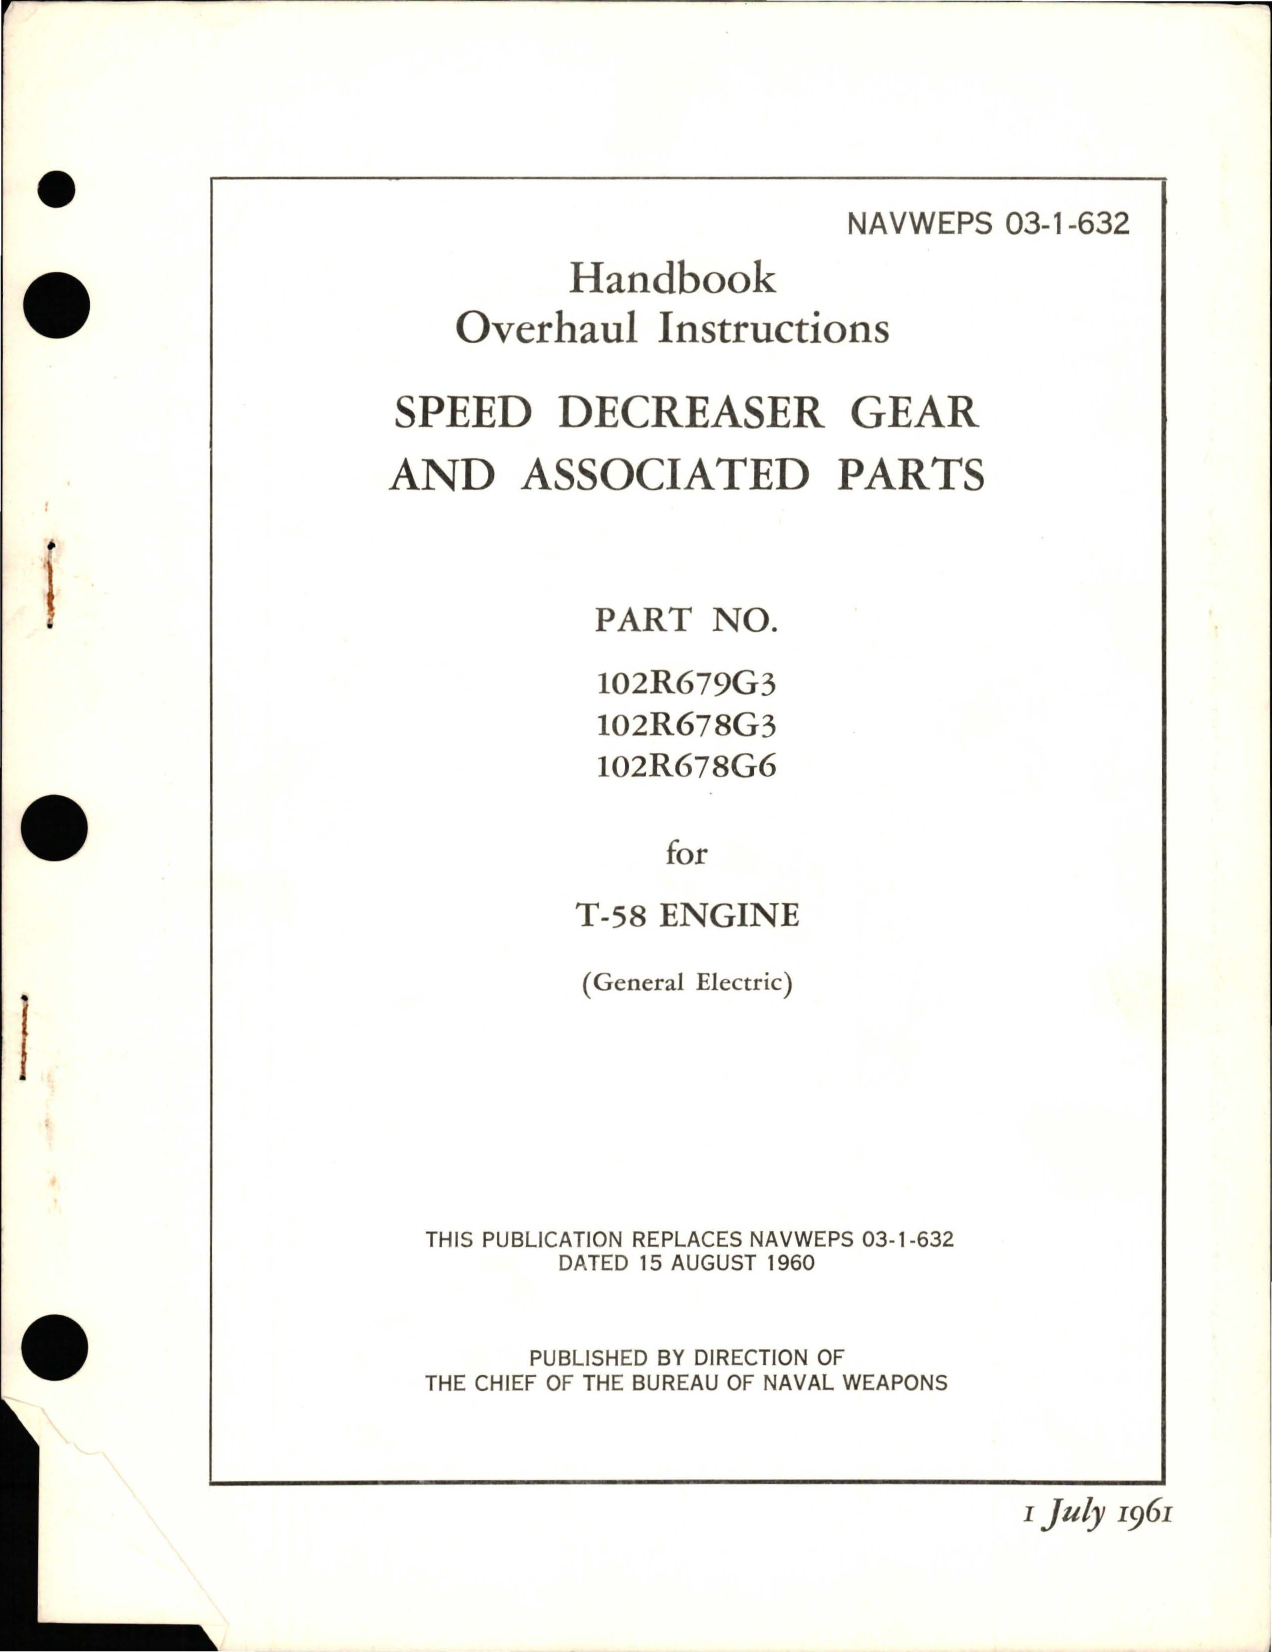 Sample page 1 from AirCorps Library document: Overhaul Instructions for Speed Decreaser Gear and Associated Parts - Parts 102R679G3, 102R678G3, and 102R678G6 for T-58 Engine 